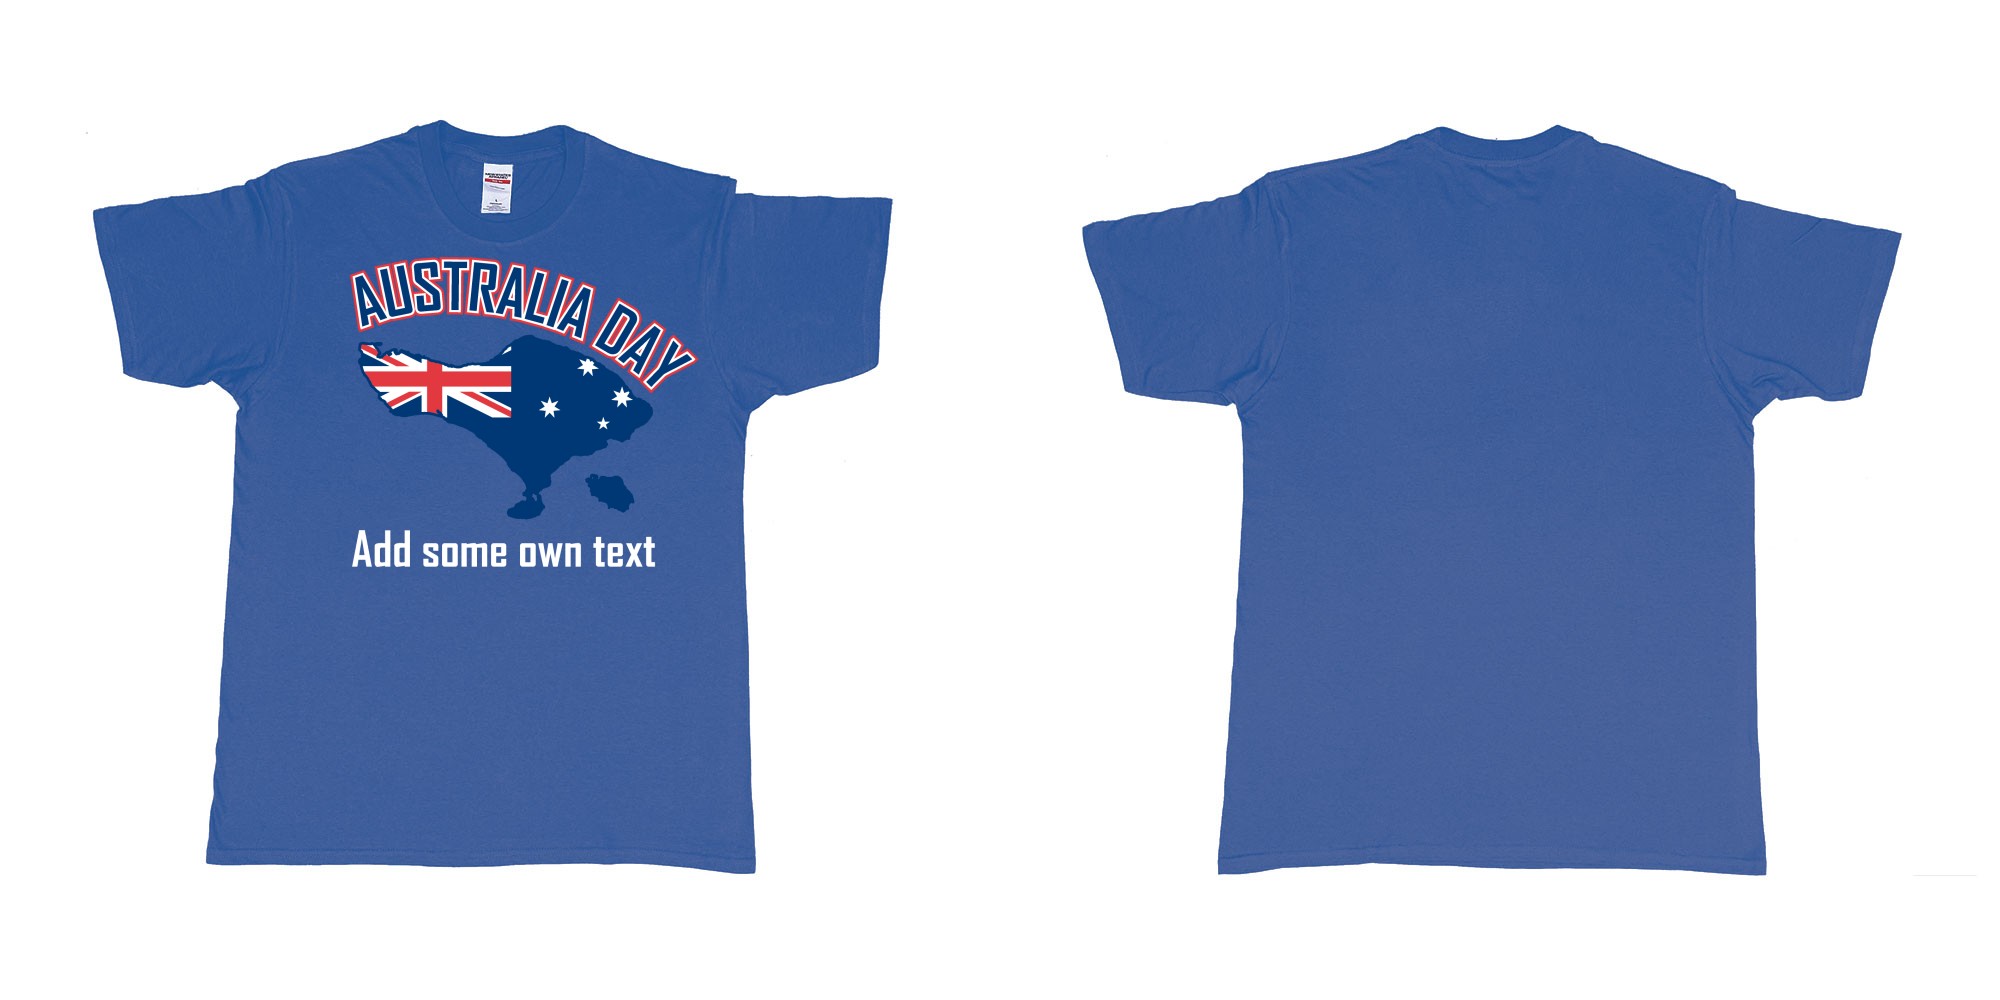 Custom tshirt design australia day in bali custom teeshirt printing in fabric color royal-blue choice your own text made in Bali by The Pirate Way